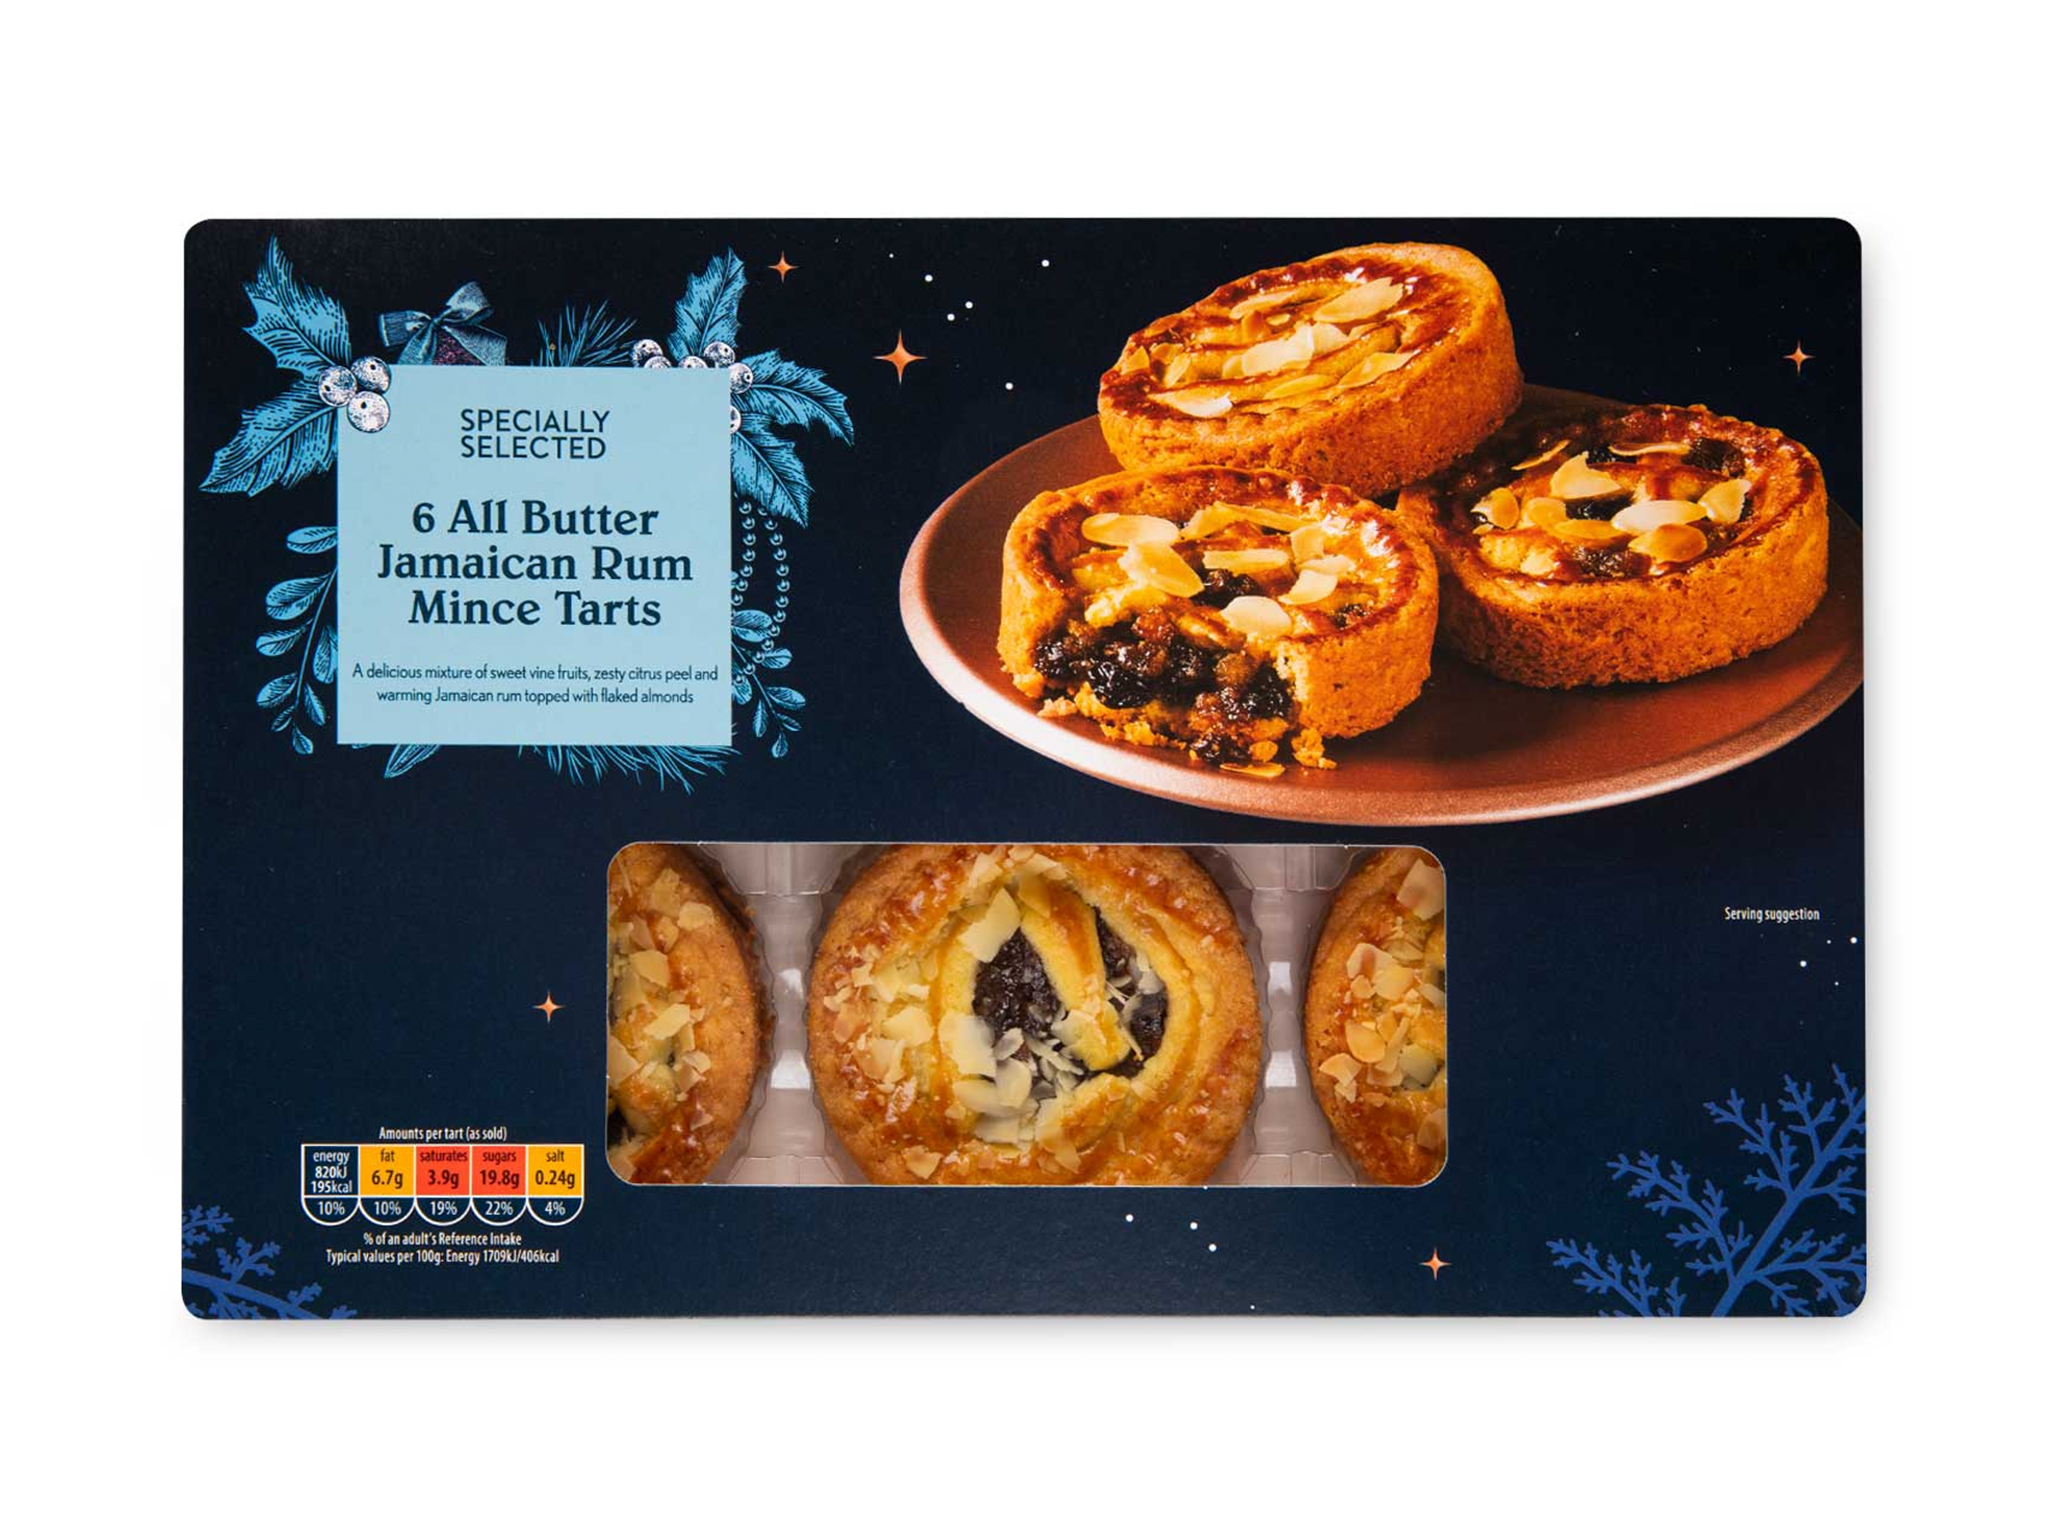 Aldi 6 specially selected all butter Jamaican rum mince tarts